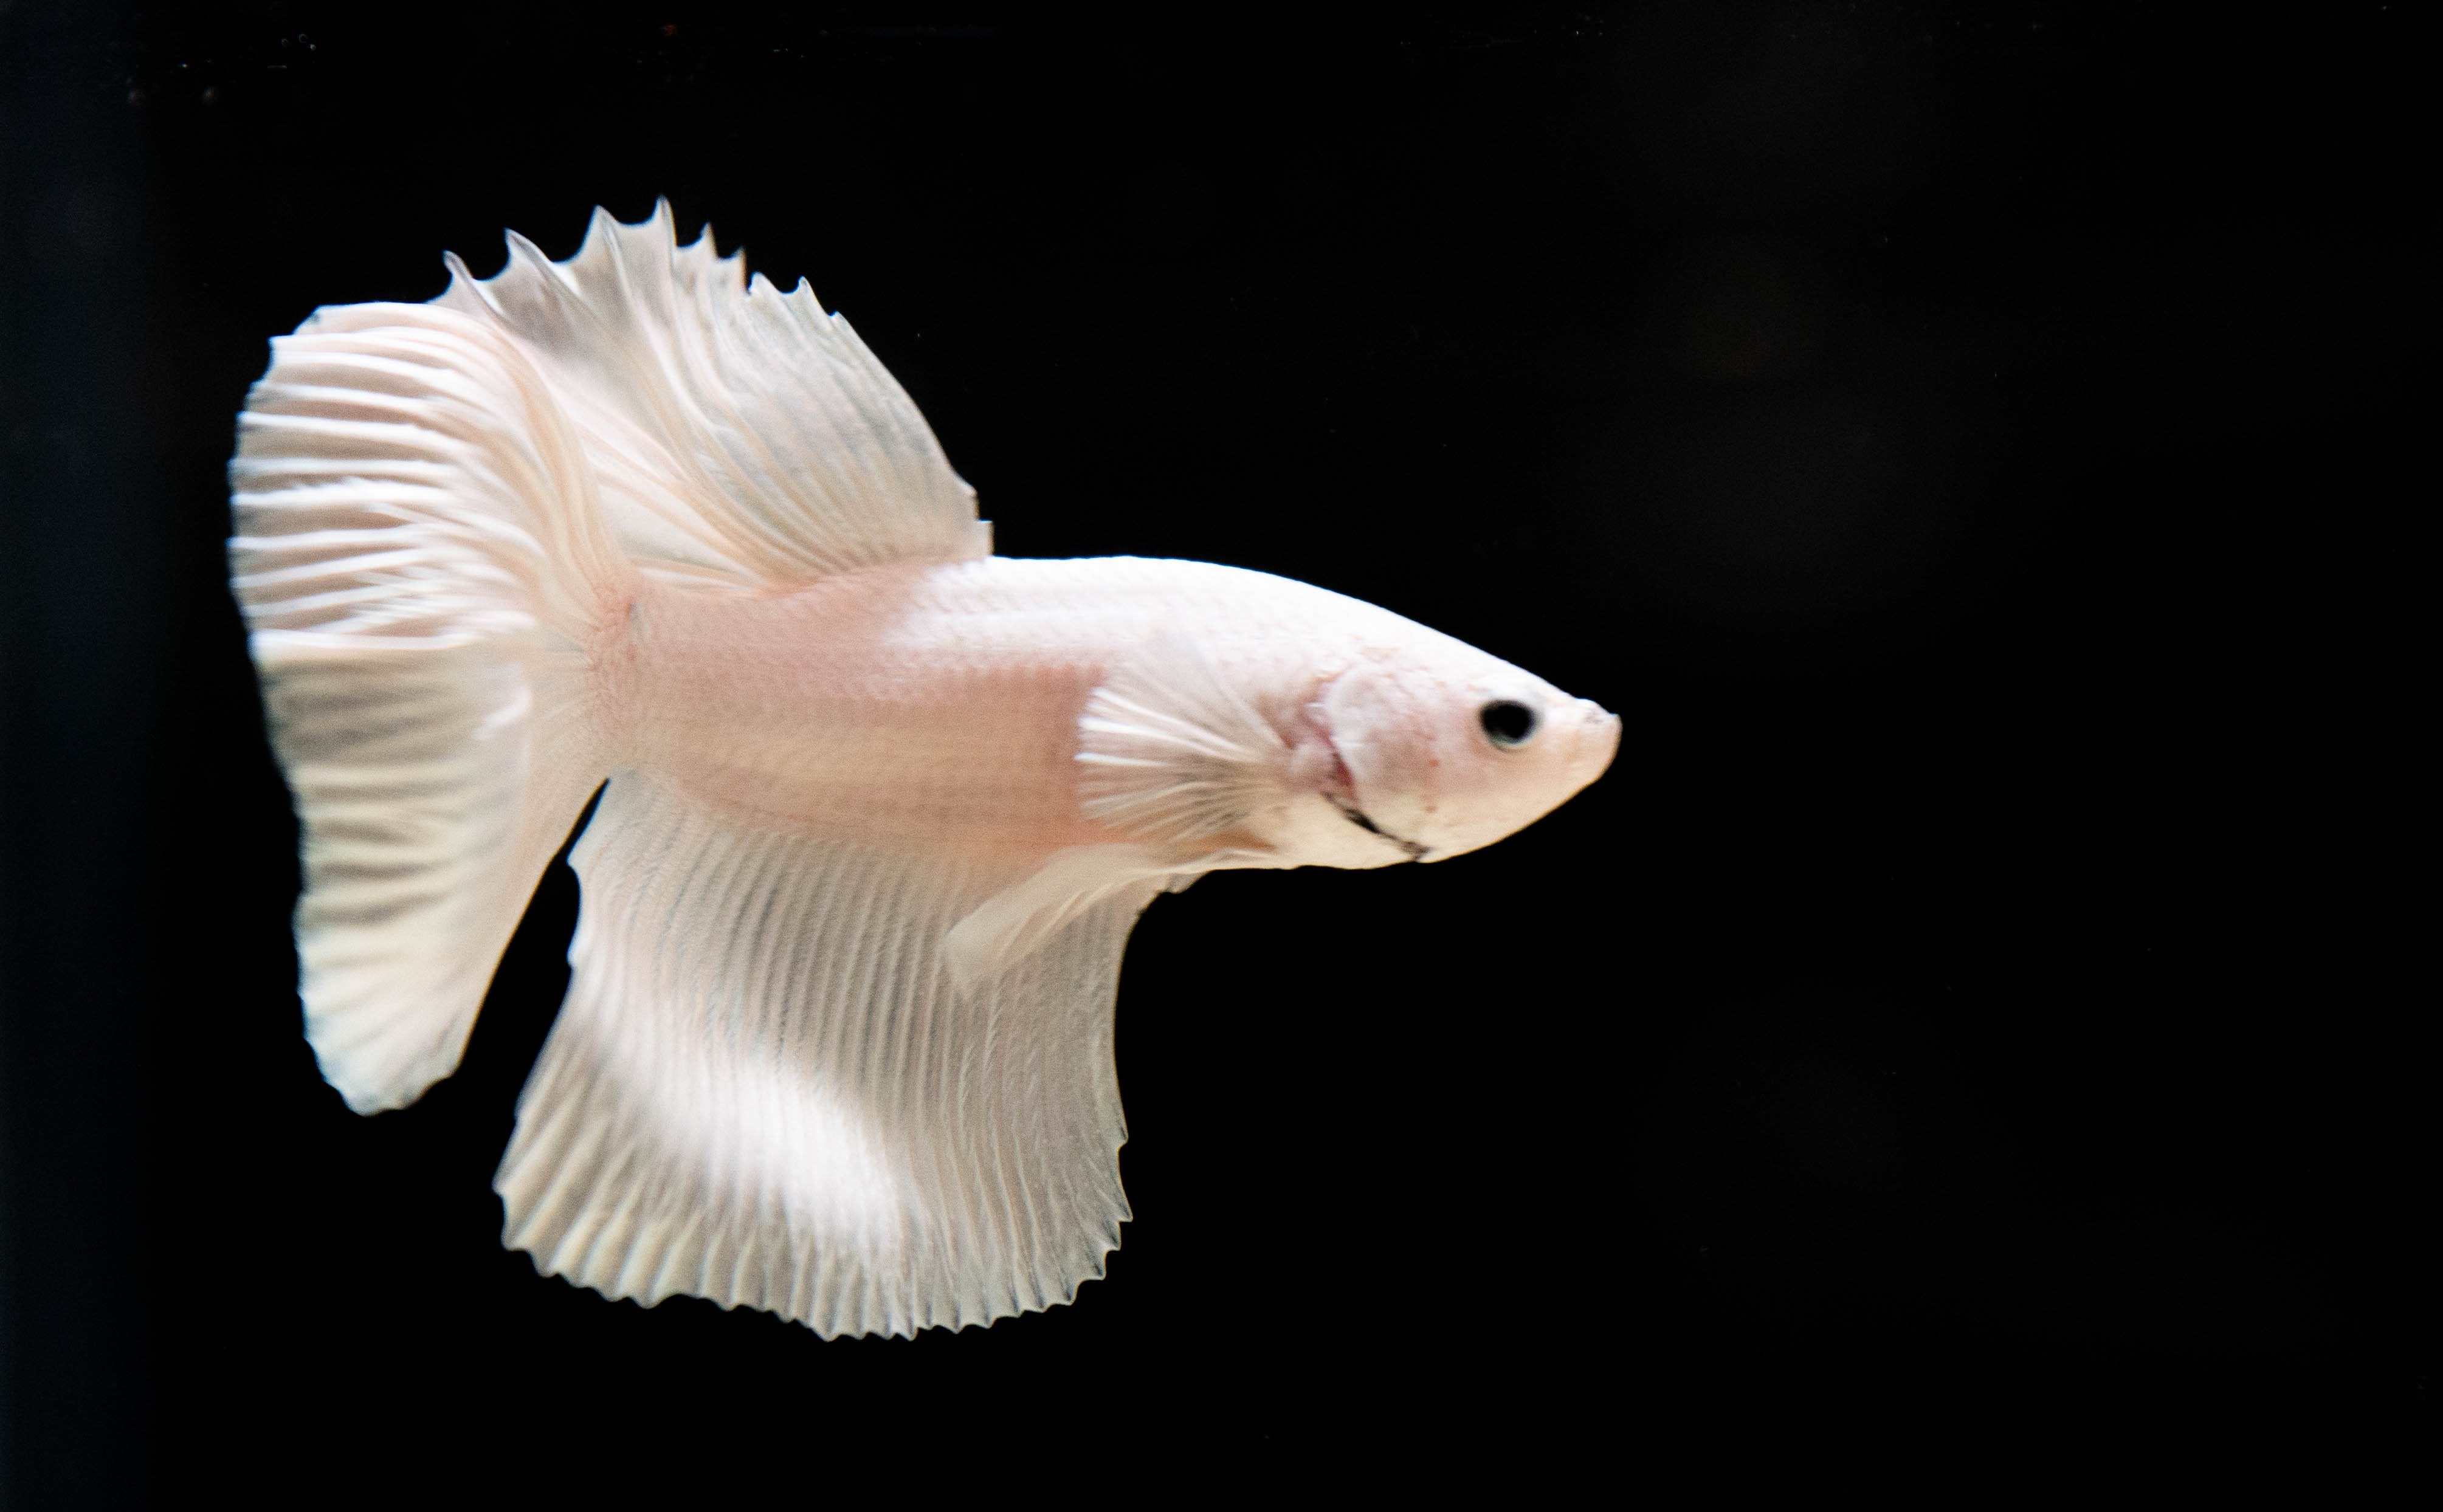 Live Giant / King Betta Fish For Sale